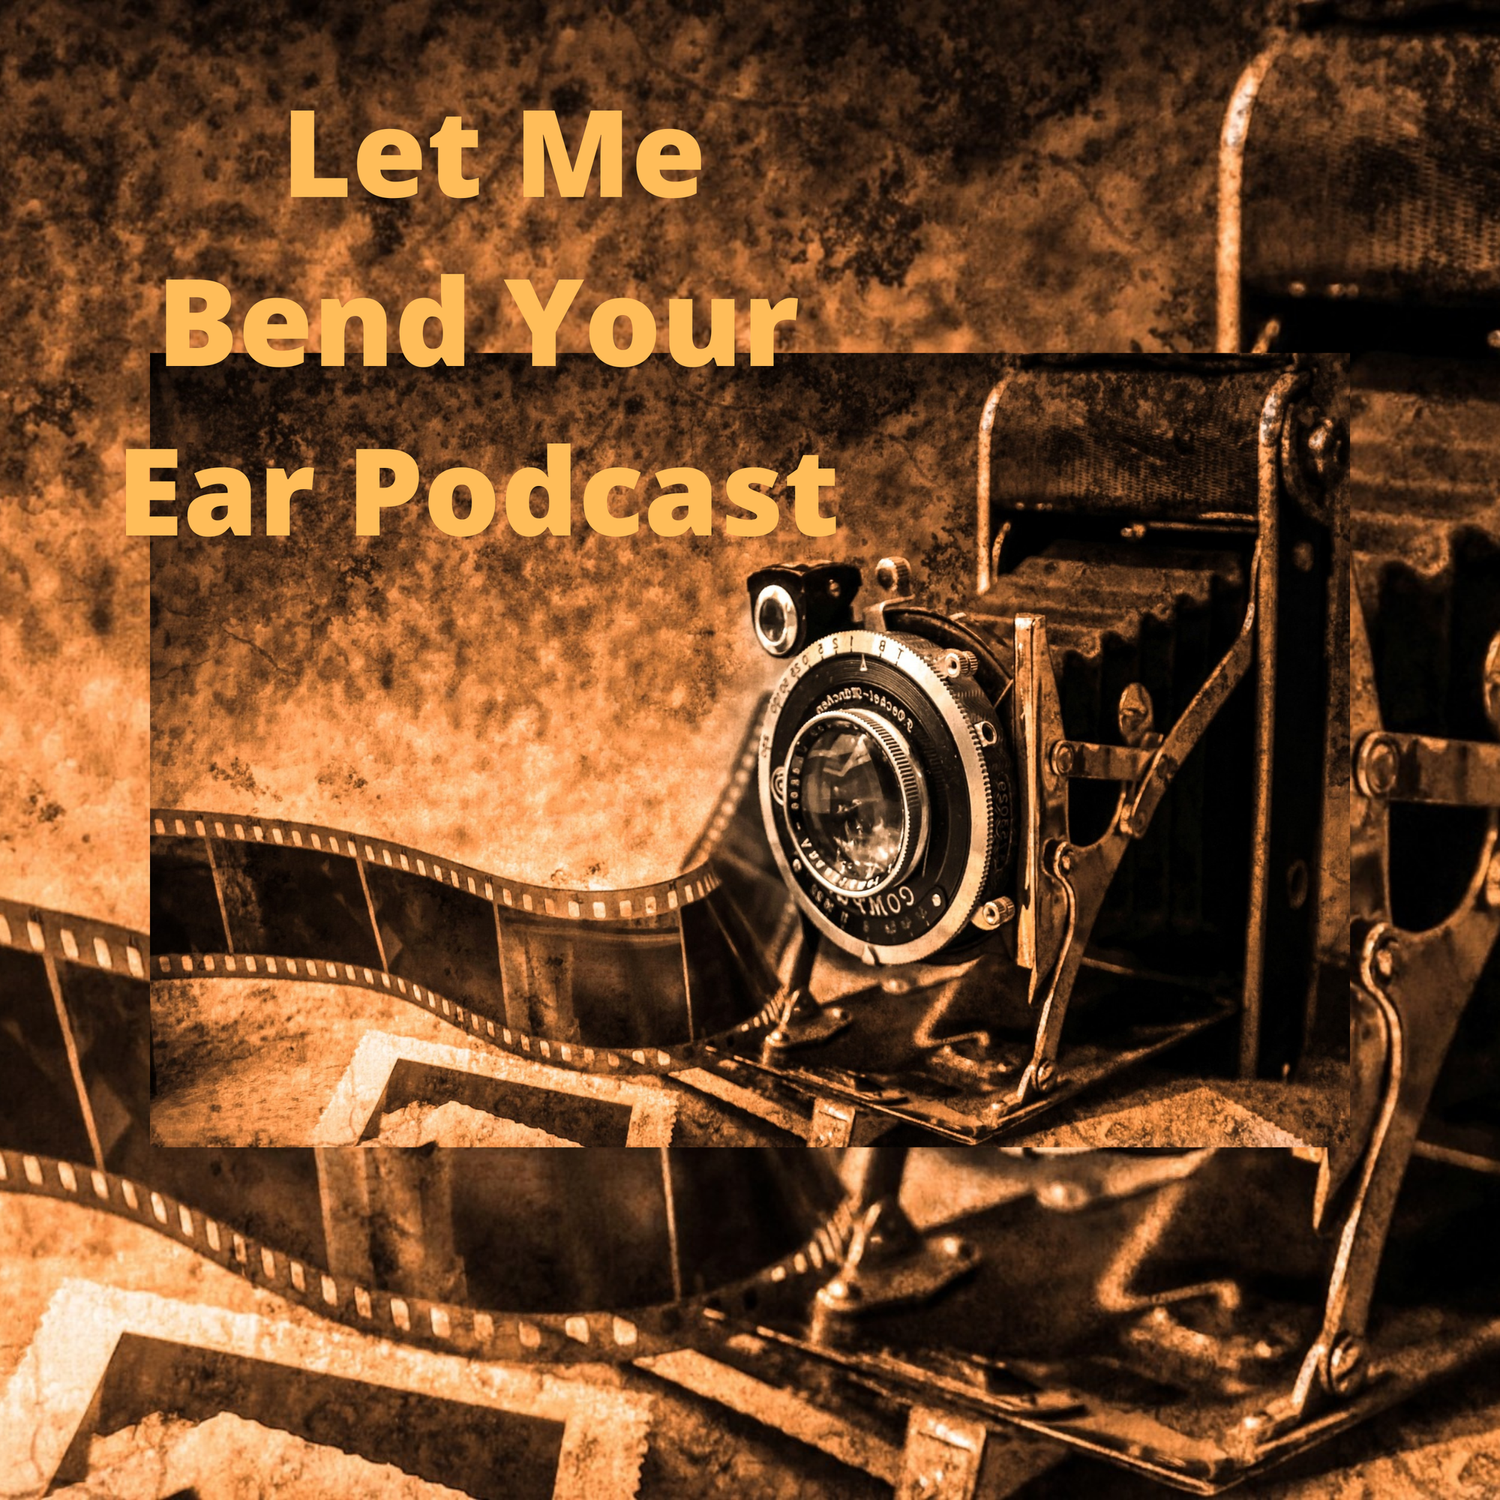 Let Me Bend Your Ear Podcast